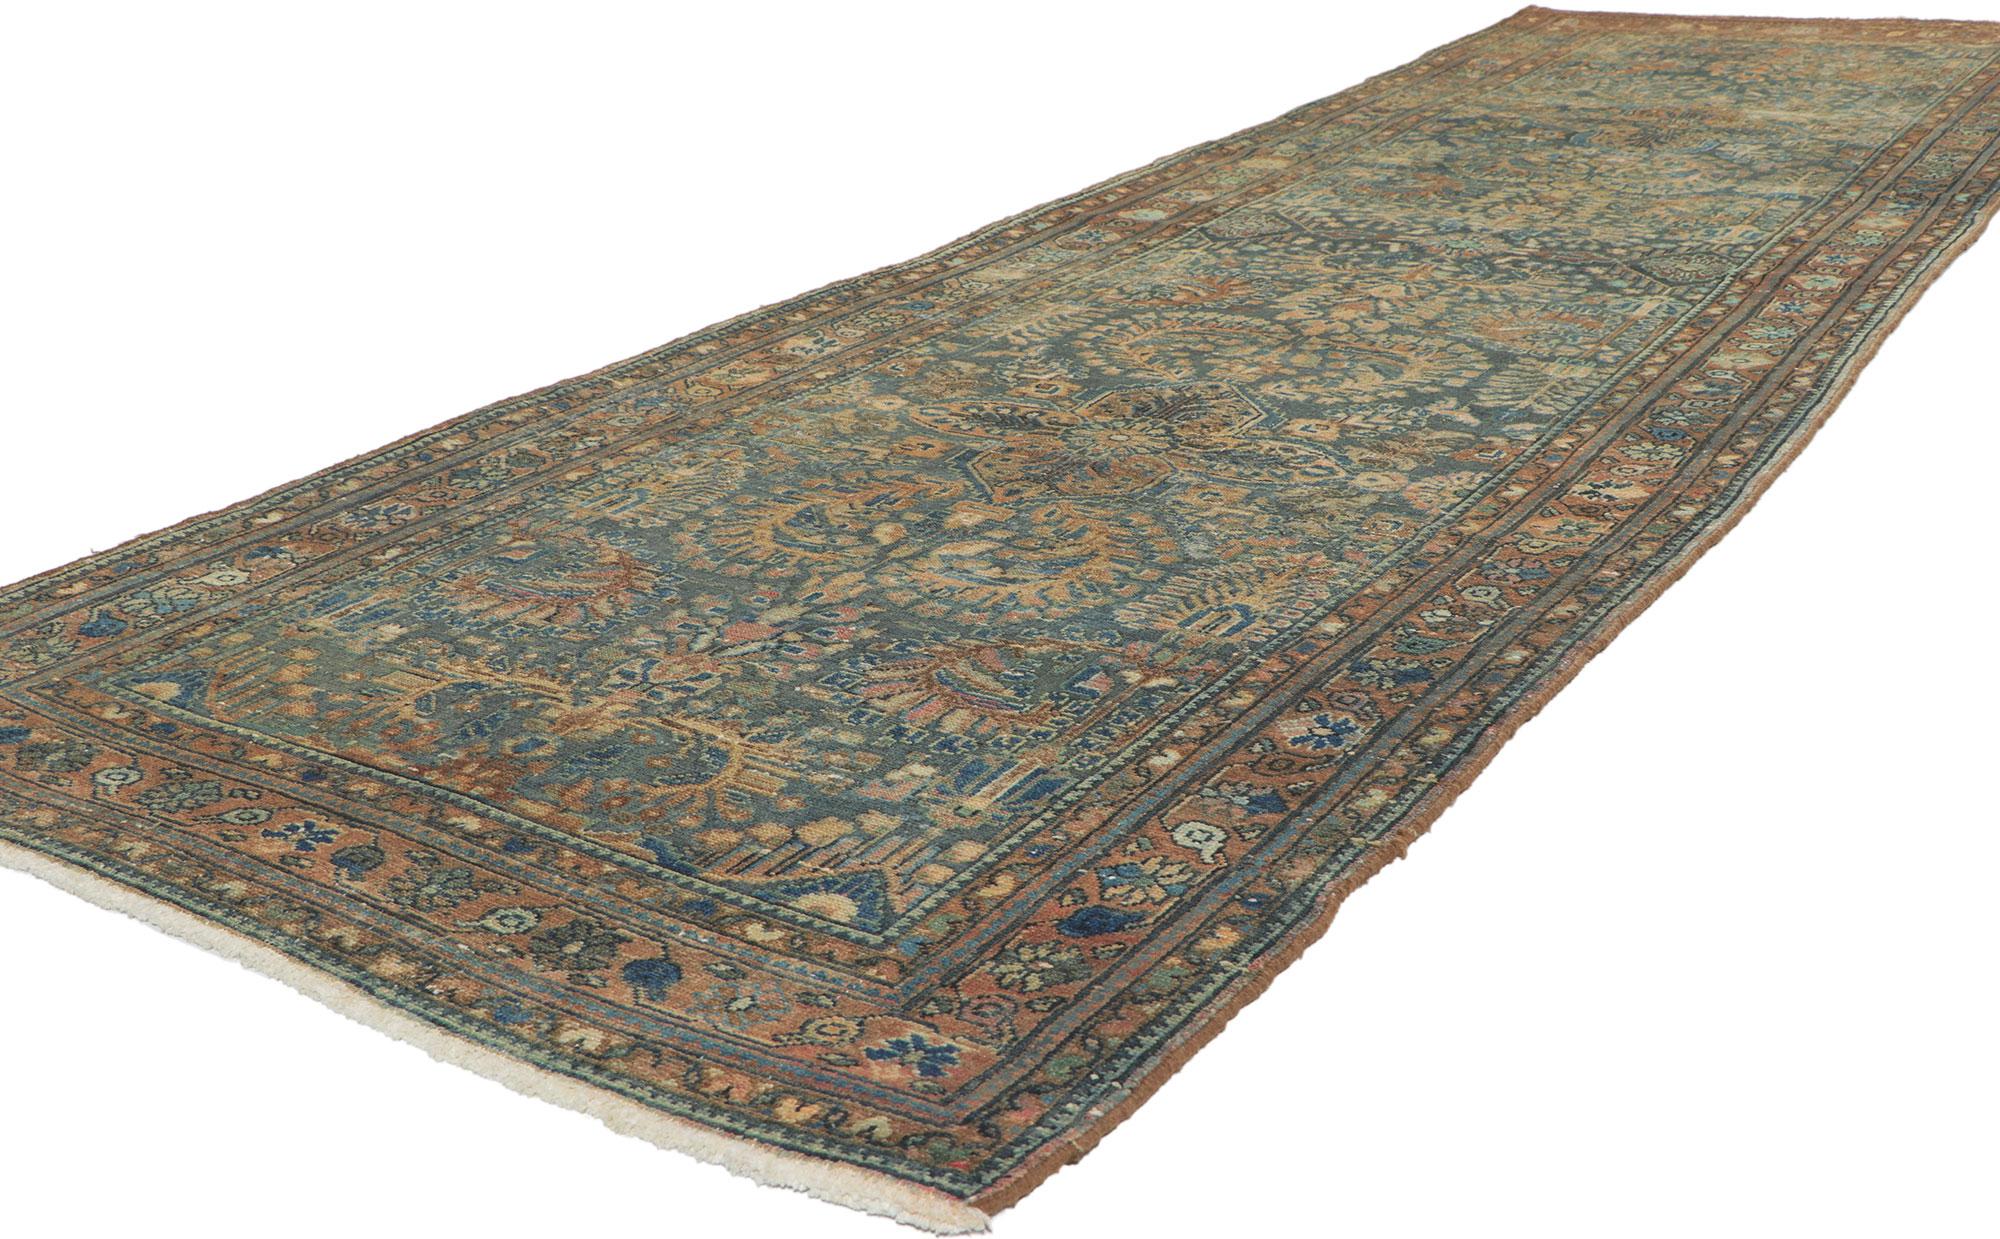 77672 Antique Persian Malayer Runner, 03'05 x 12'02. With its timeless style, incredible detail and texture, this hand knotted wool runner is a captivating vision of woven beauty. The classic design and refined colorway woven into this rug work